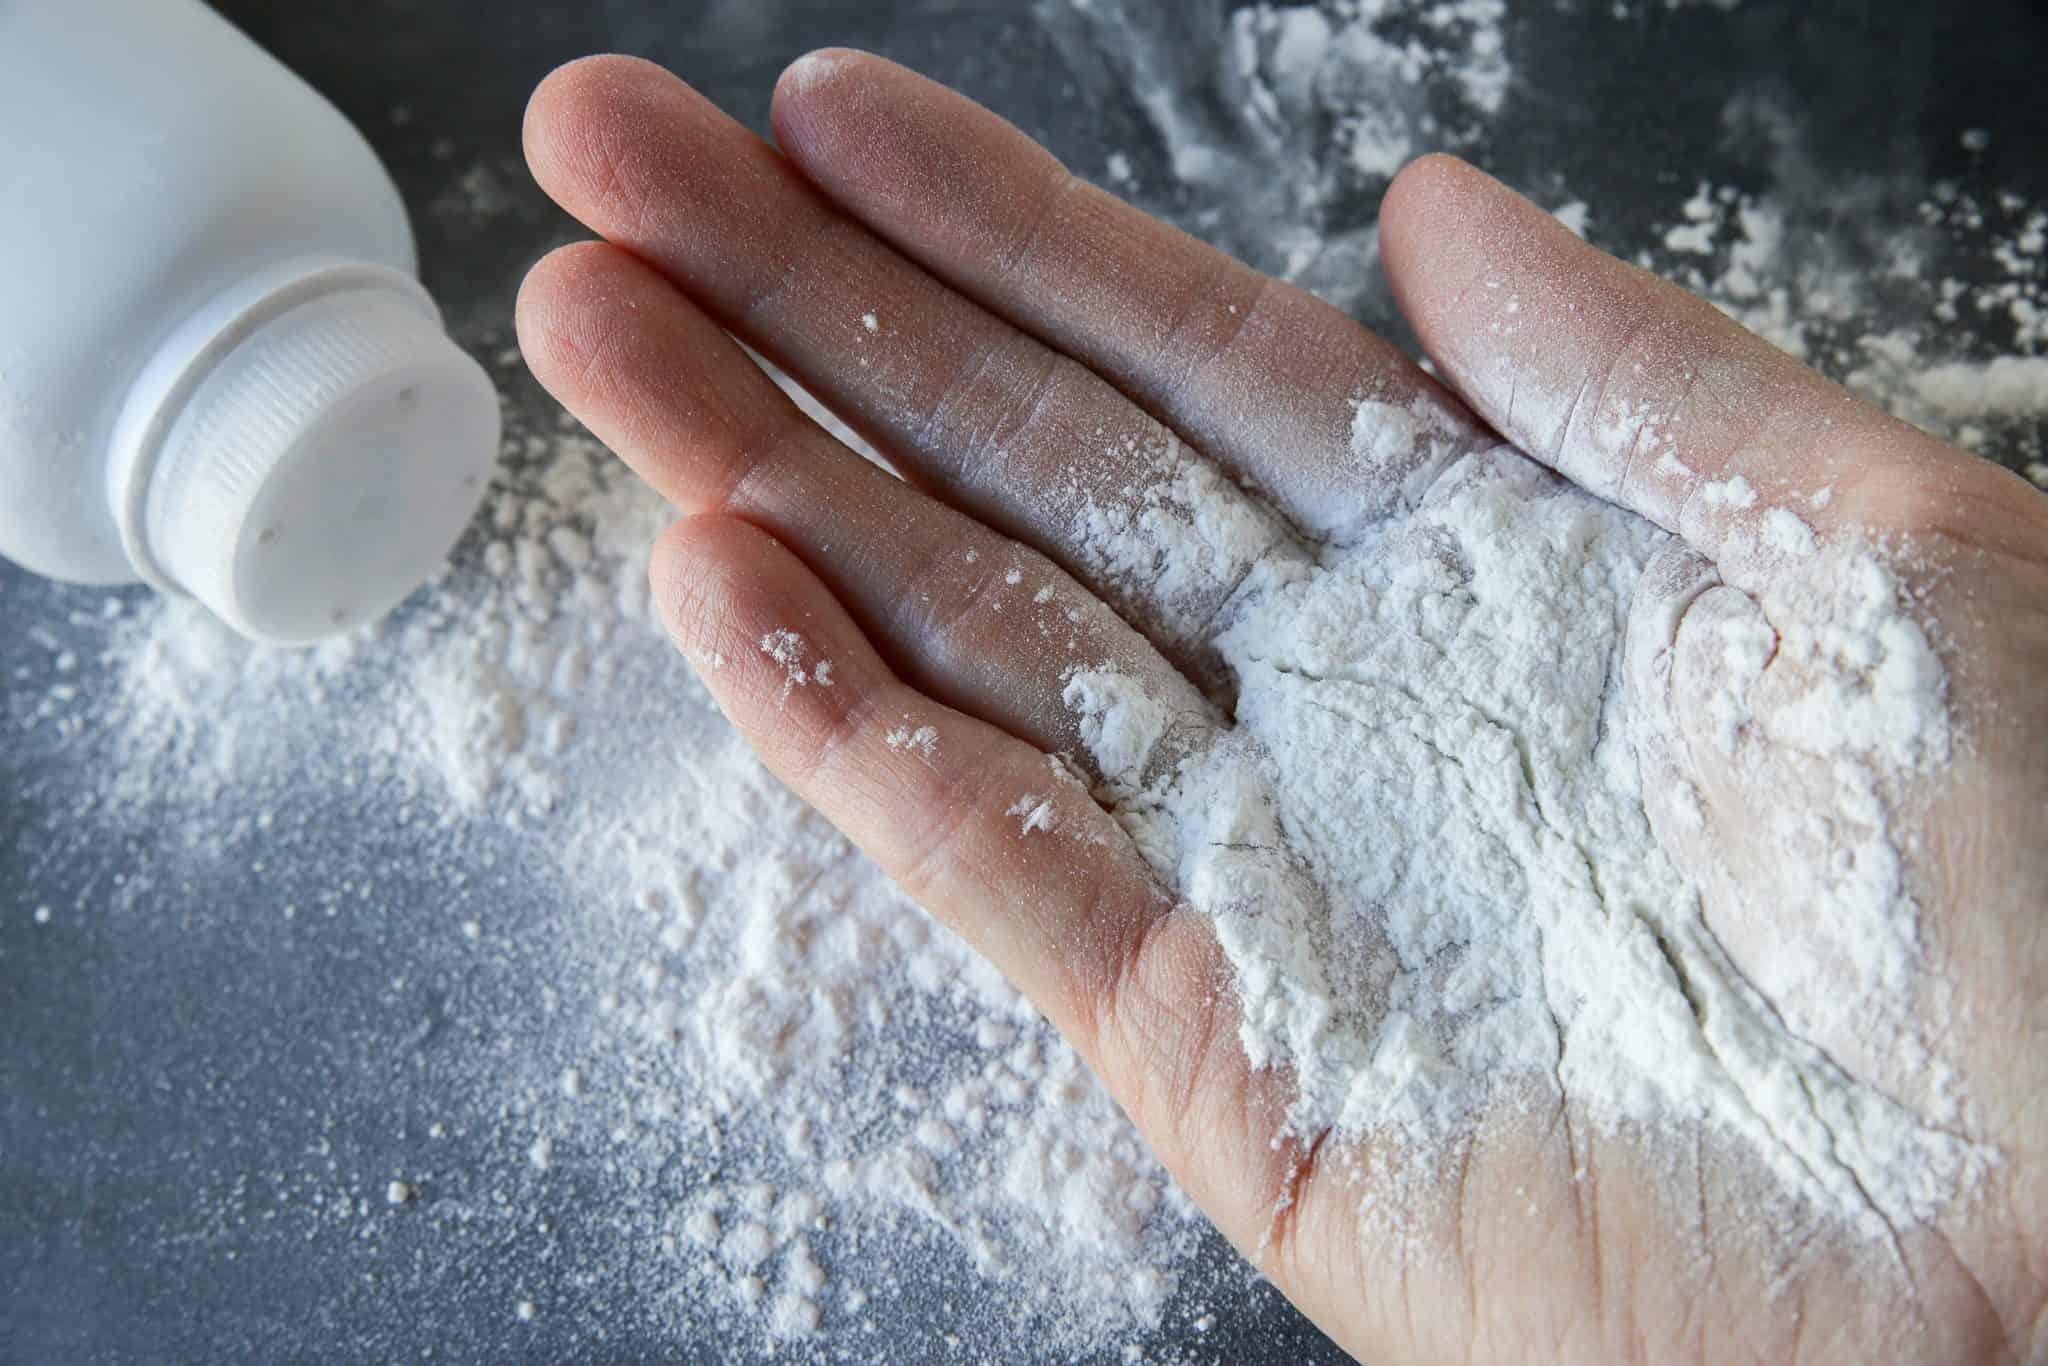 talcum powder on a hand, with a spilled bottle of talcum powder or baby powder in the background over a black table